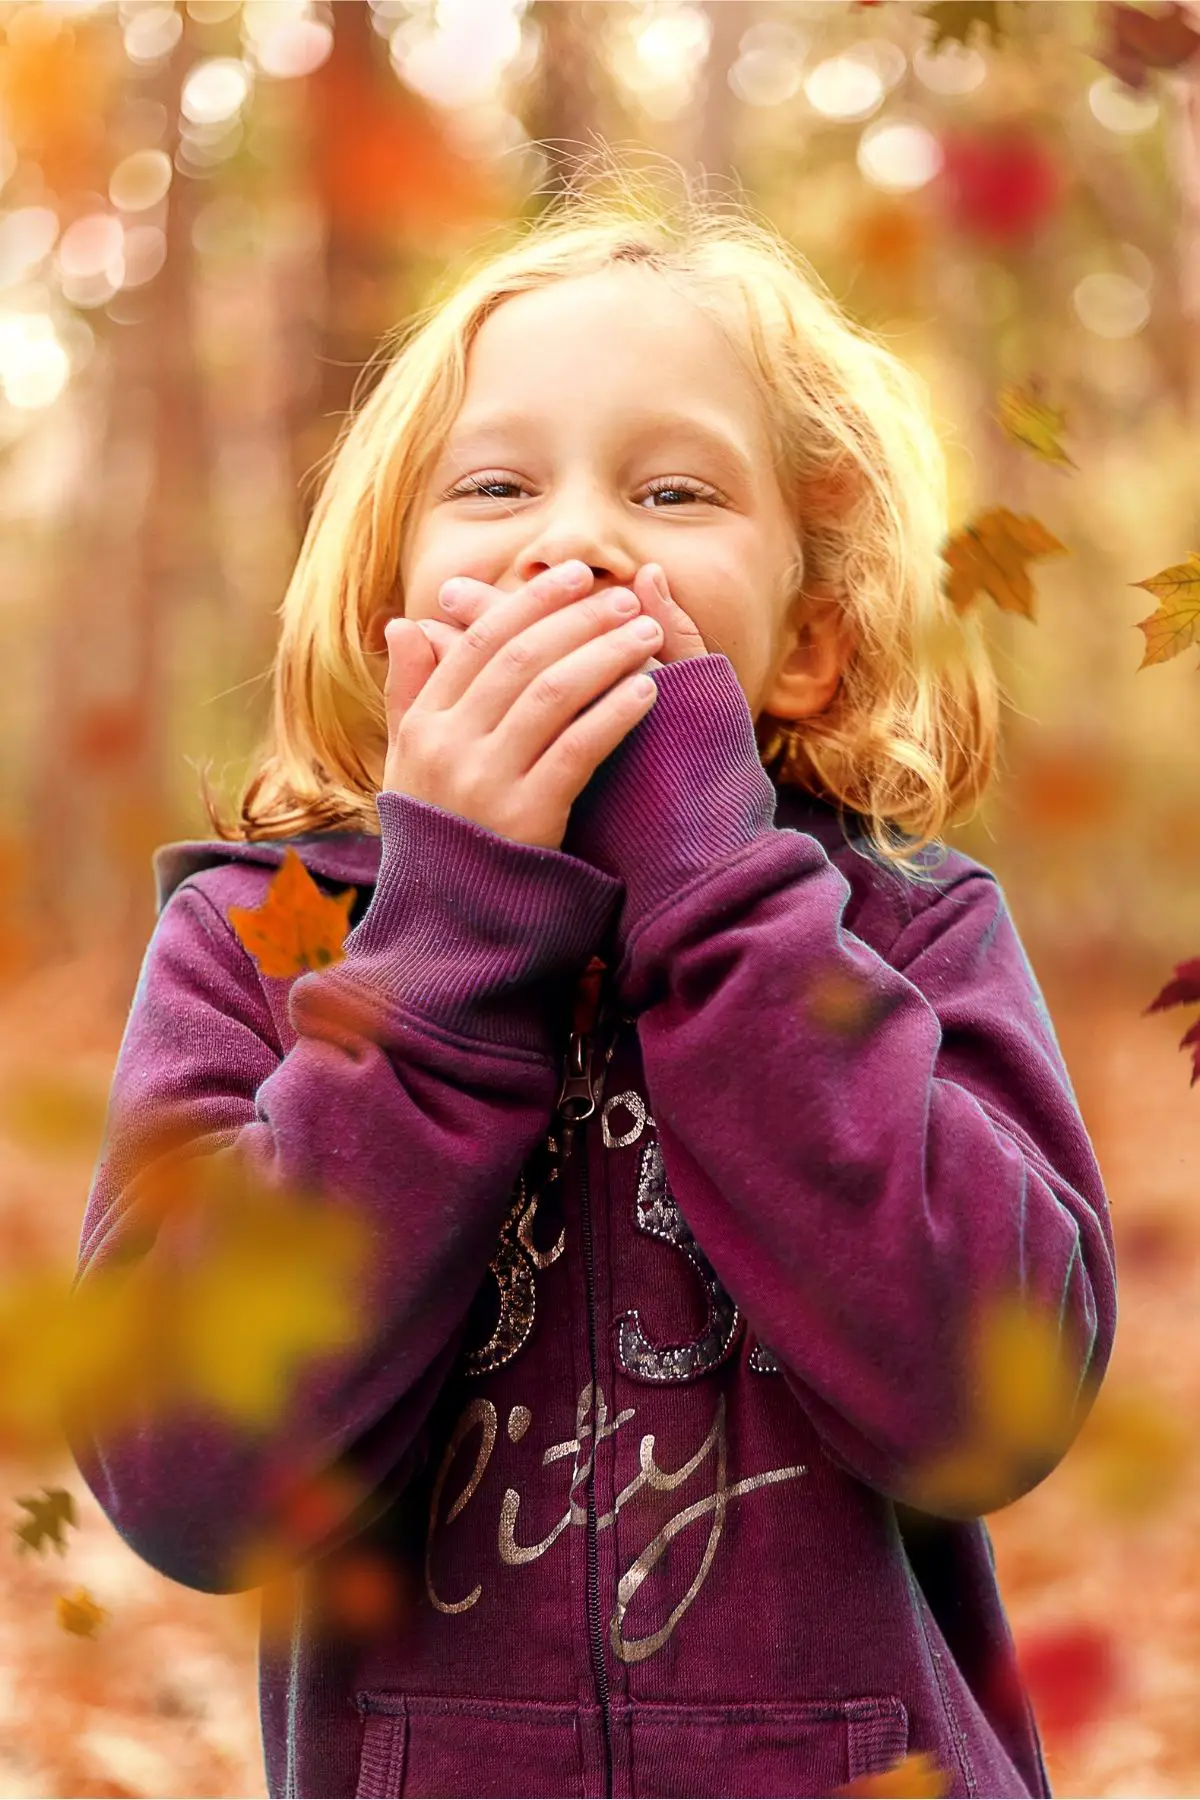 A blond haired girl wearing a purple sweatshirt is laughing.  She has her hands over her mouth and it's fall.